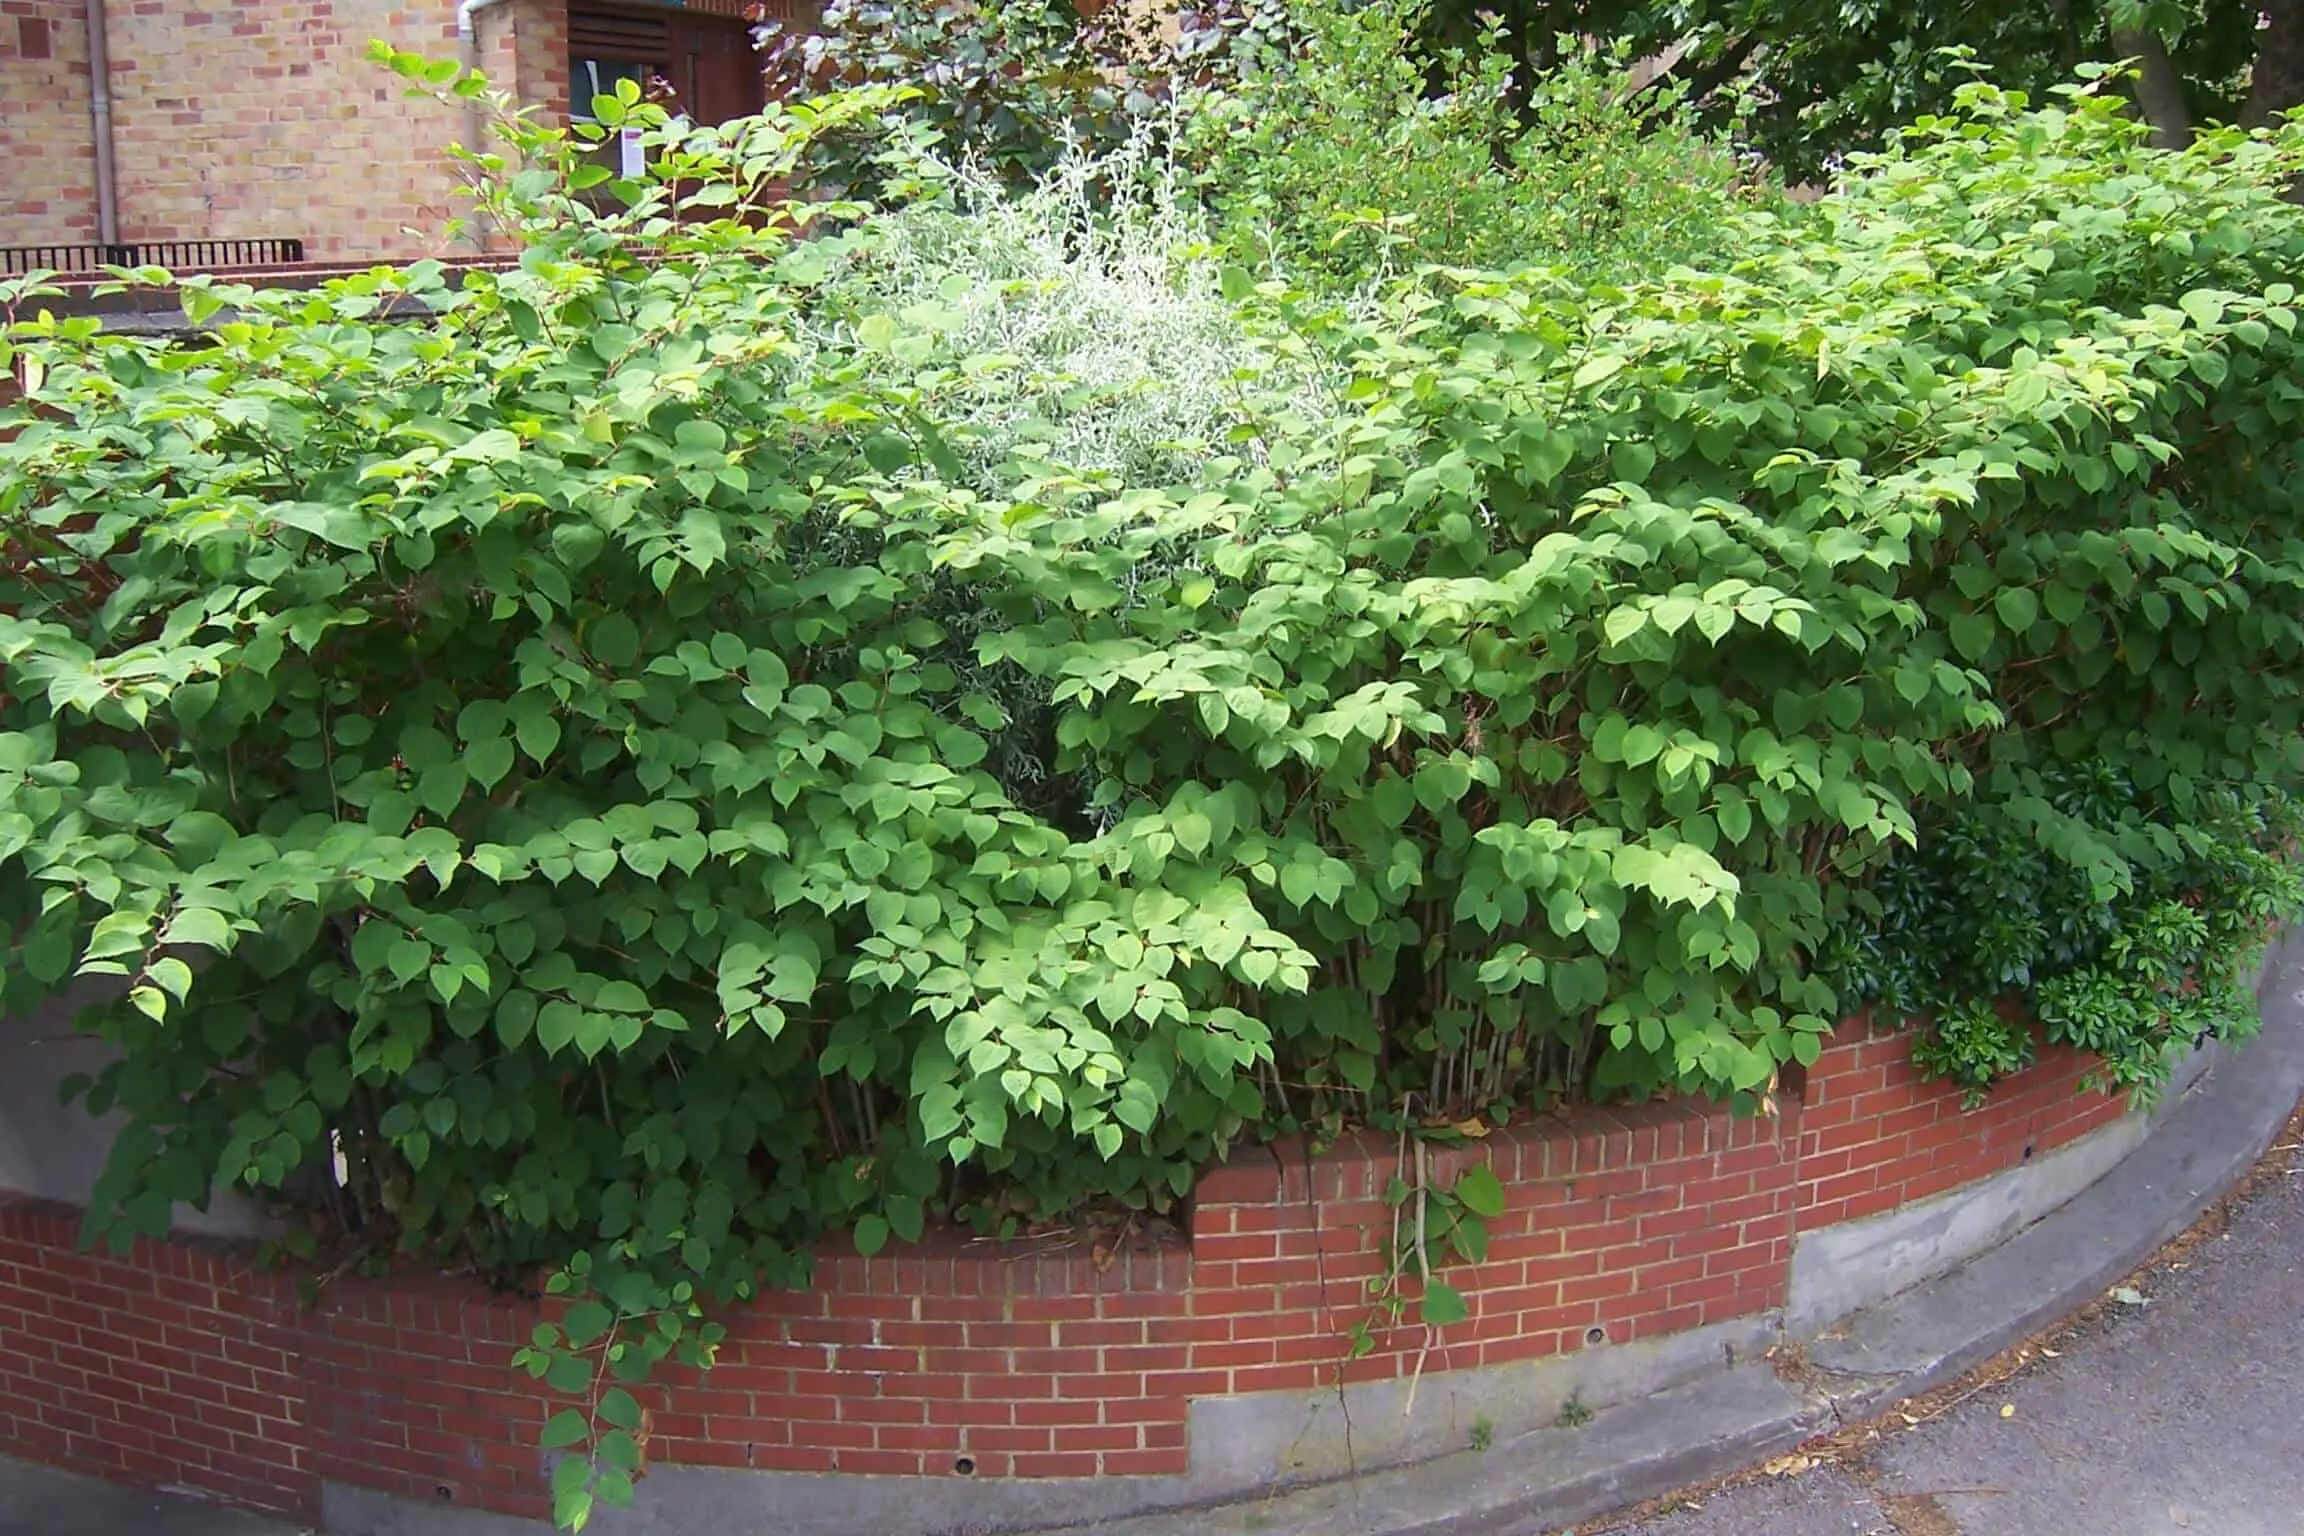 Japanese knotweed in your garden can literally take over the whole of it in a short space of time and kill off all other plants